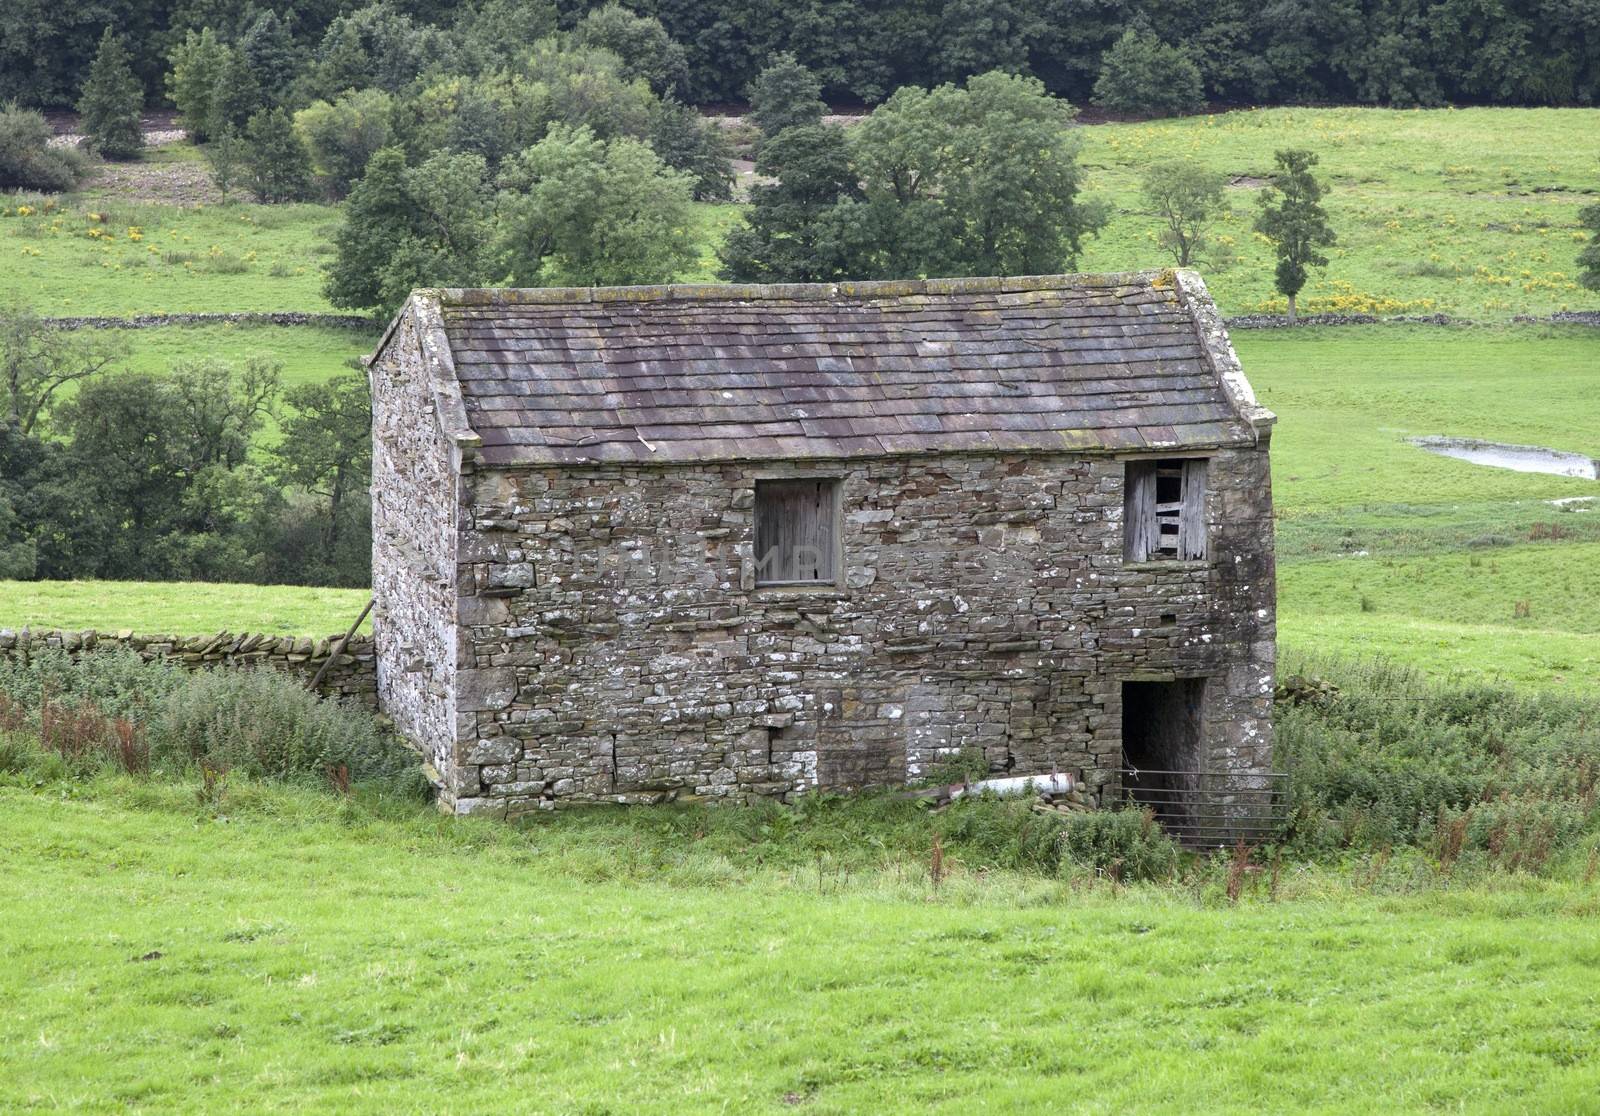 Field barn used to store hay for the winter, , Swaledale, Yorkshire Dales National Park, England.